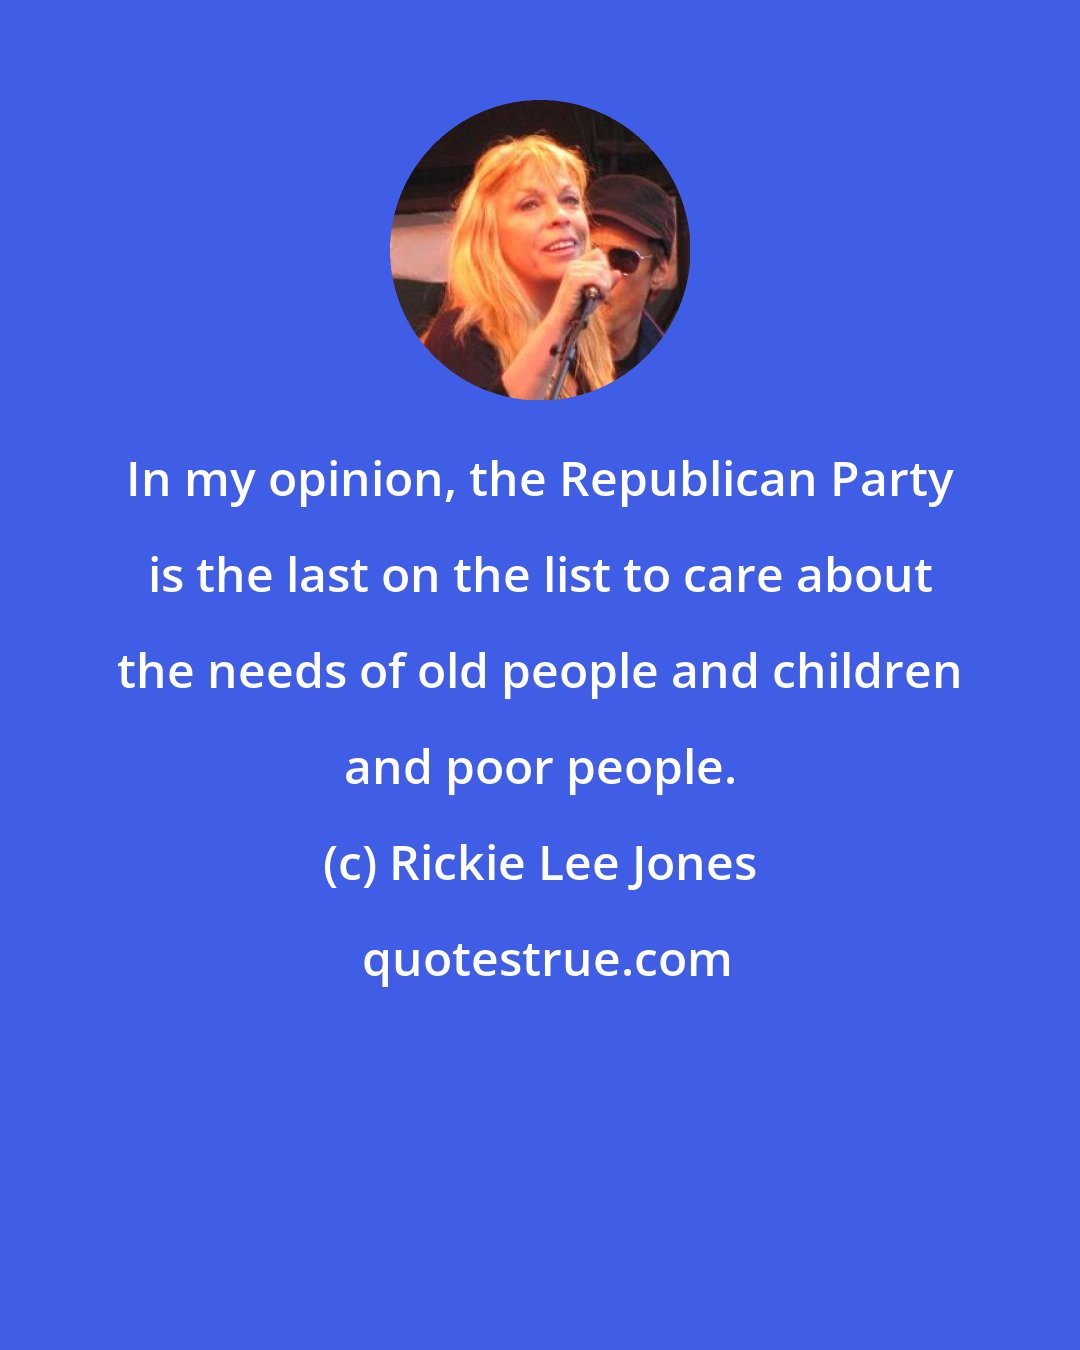 Rickie Lee Jones: In my opinion, the Republican Party is the last on the list to care about the needs of old people and children and poor people.